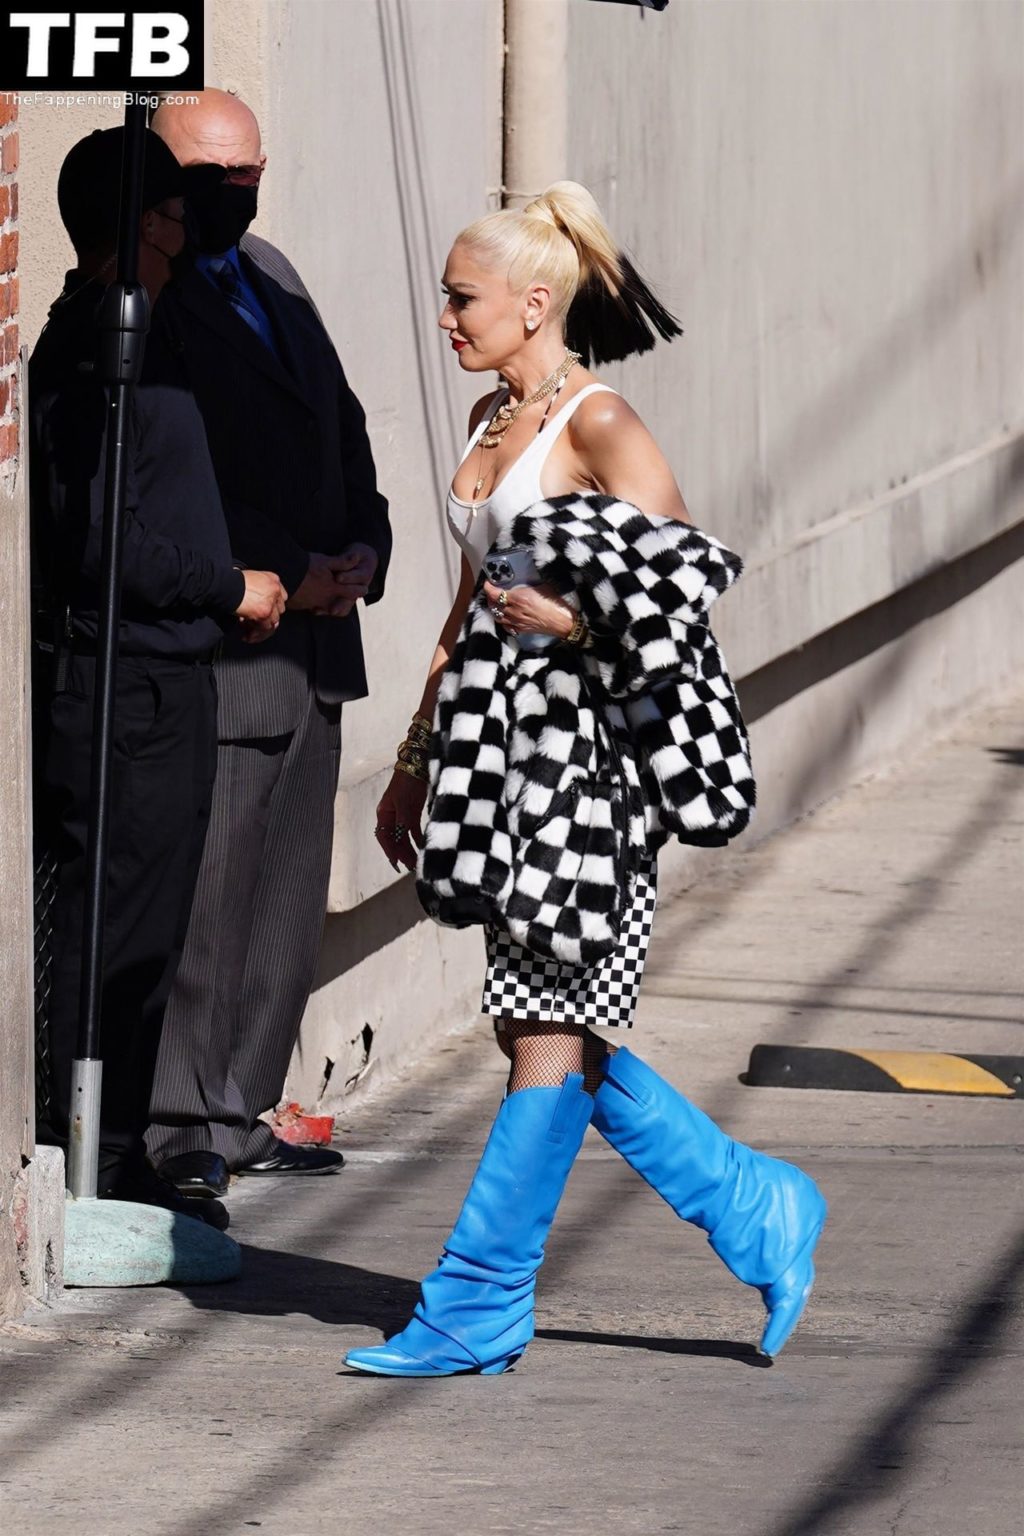 Gwen Stefani Sexy The Fappening Blog 46 1024x1536 - Gwen Stefani Arrives For an Appearance on Jimmy Kimmel Live! (87 Photos)